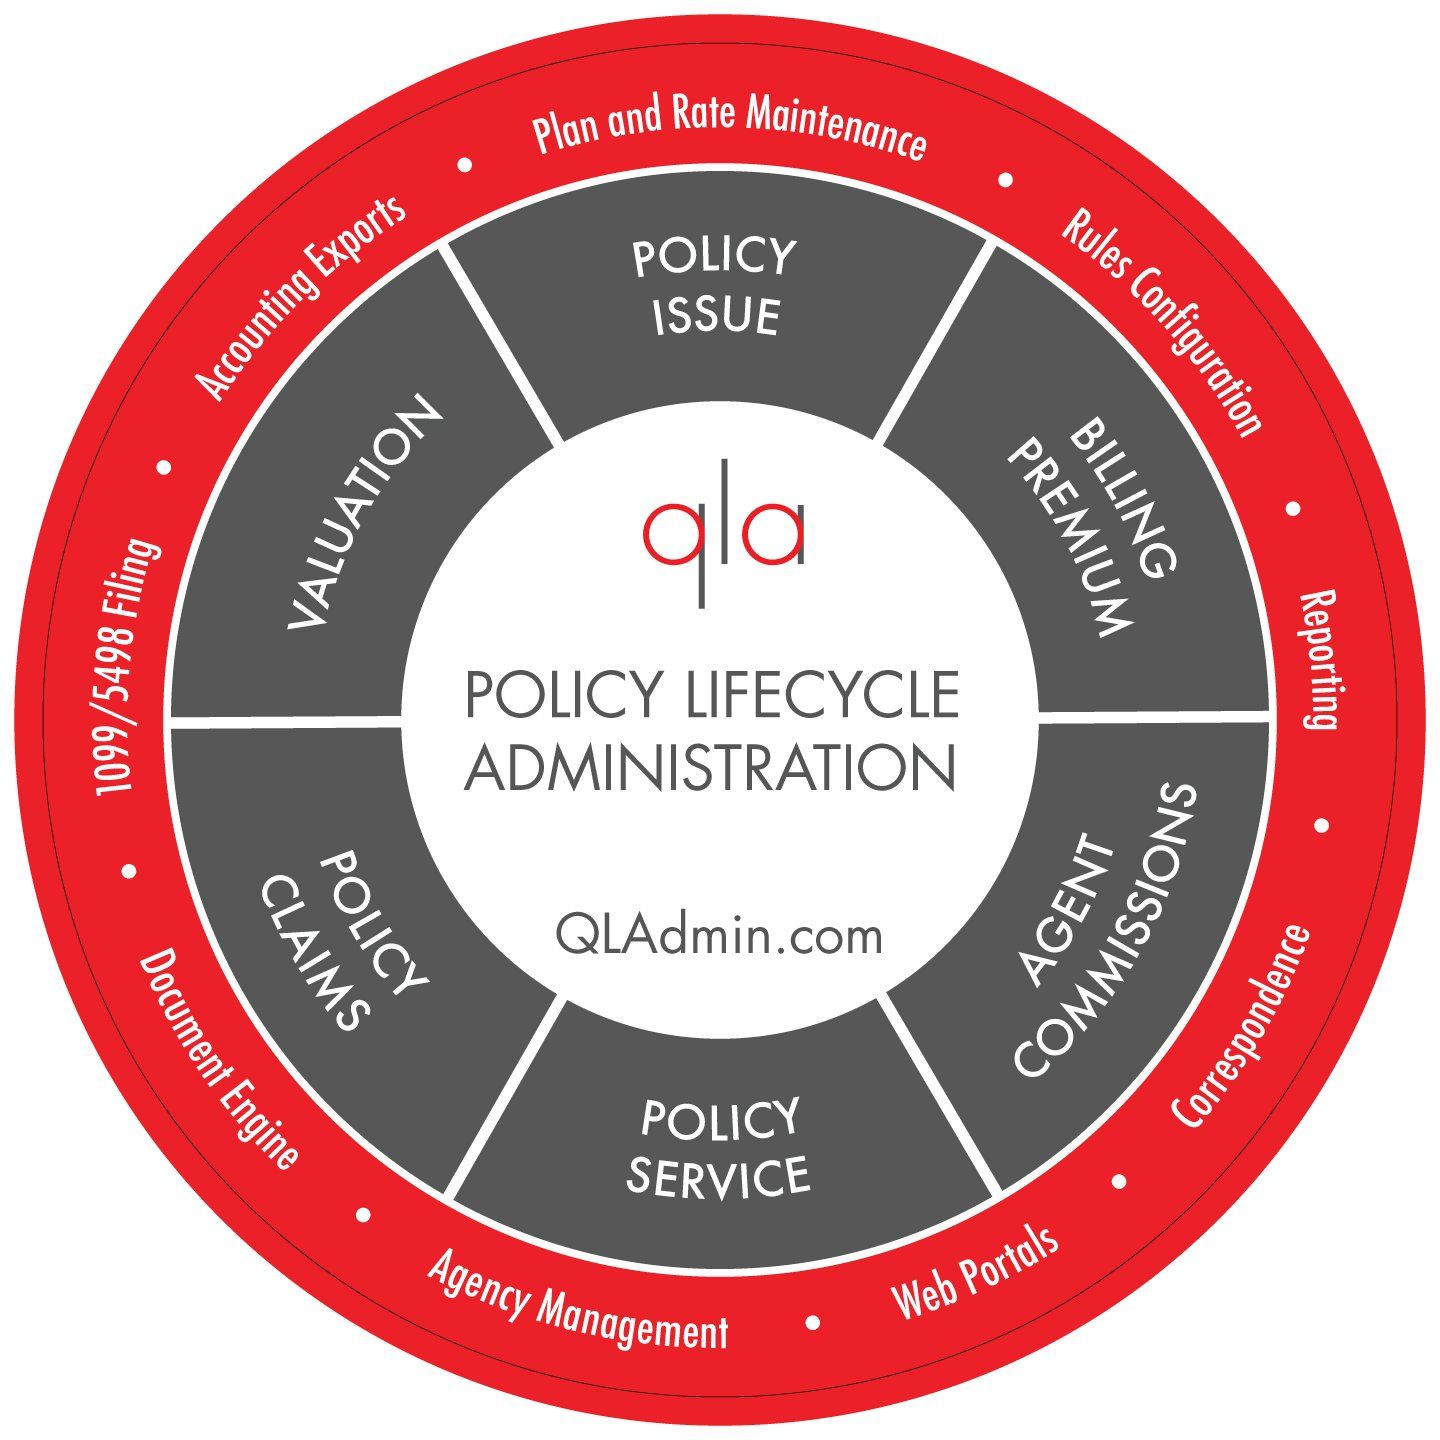 QLAdmin Solutions Policy Administration Lifecycle